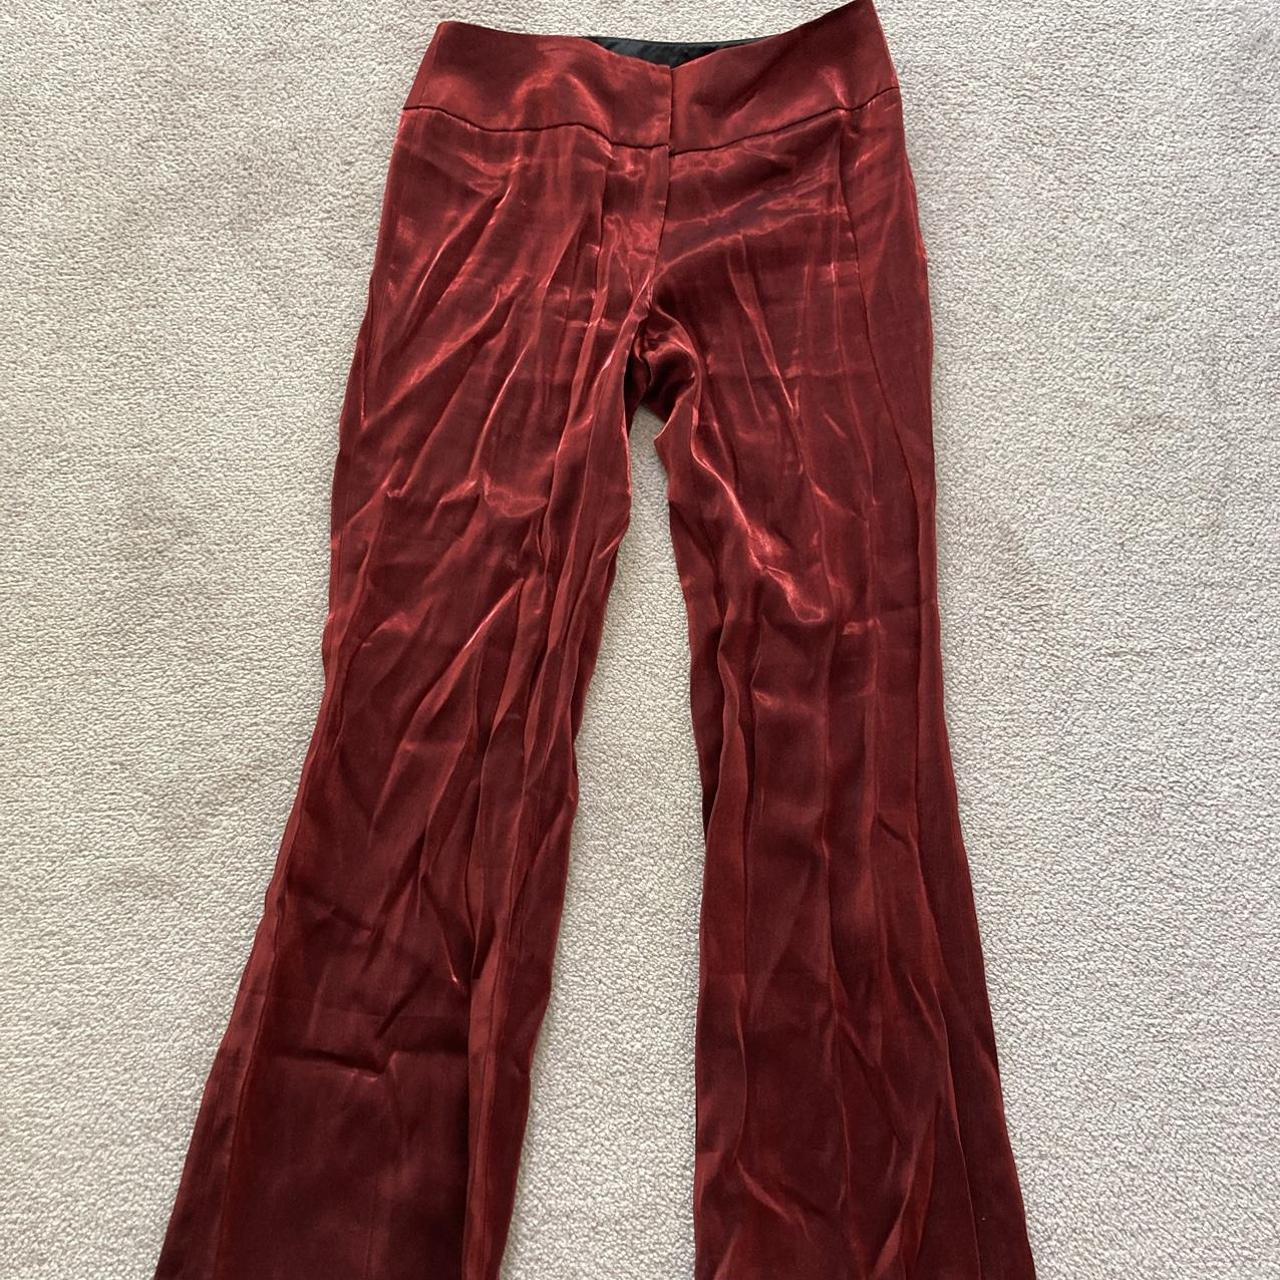 BAY 2p Burgundy Pant Work Suit NWT S/M. 🔥 Such a... - Depop